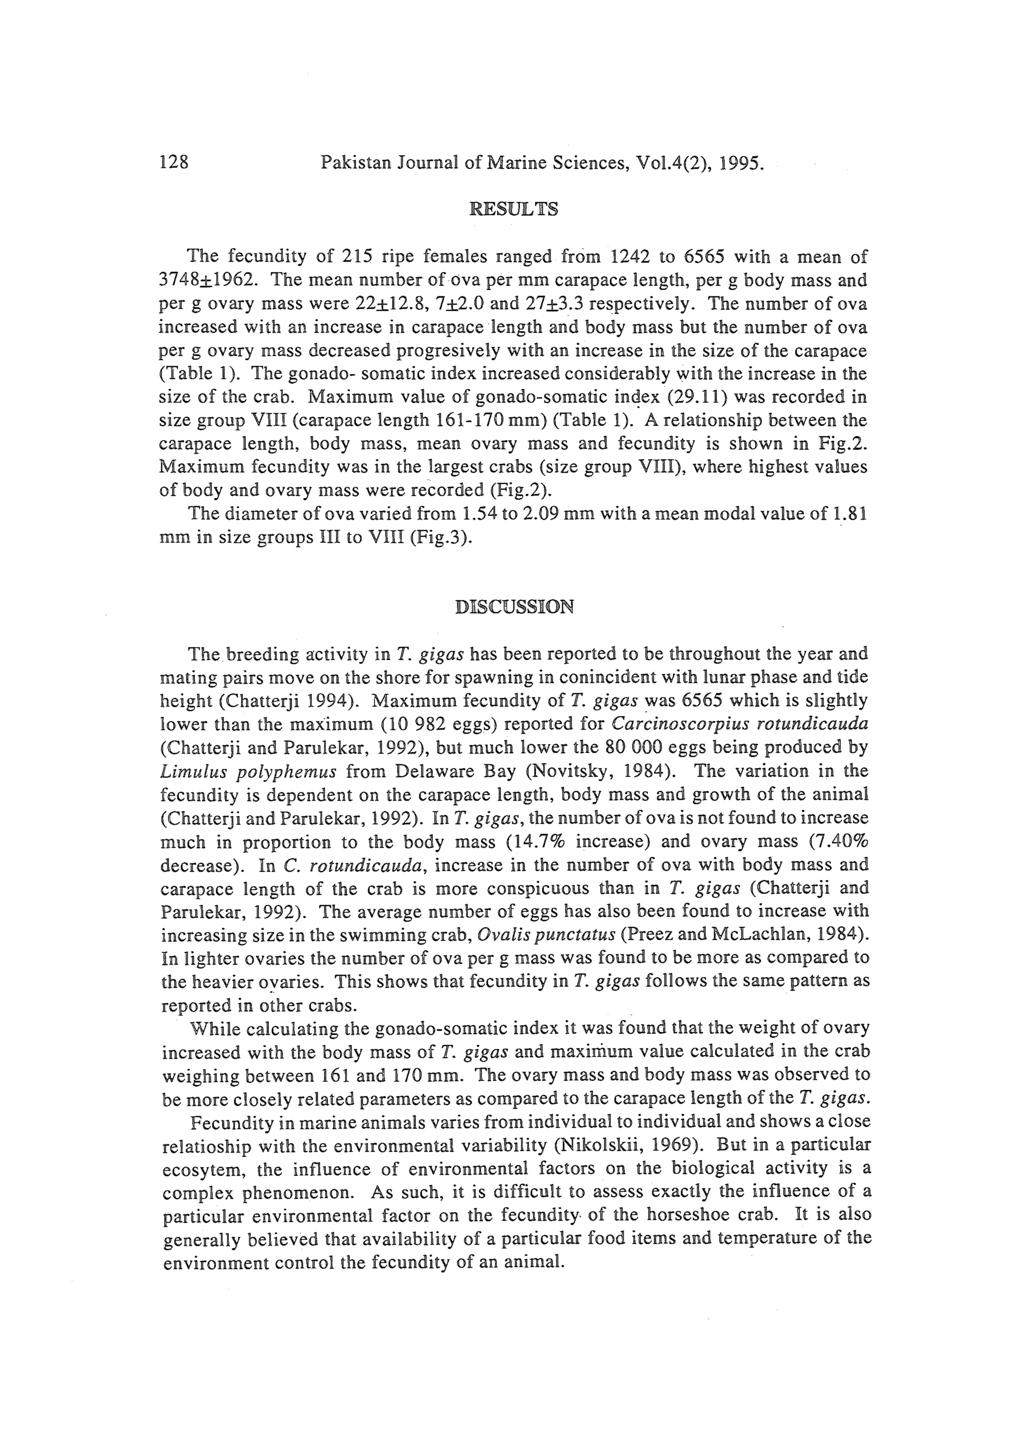 128 Pakistan Journal of Marine Sciences, VoL4(2), 1995. RESULTS The fecundity of 215 ripe females ranged from 1242 to 6565 with a mean of 3748±1962.